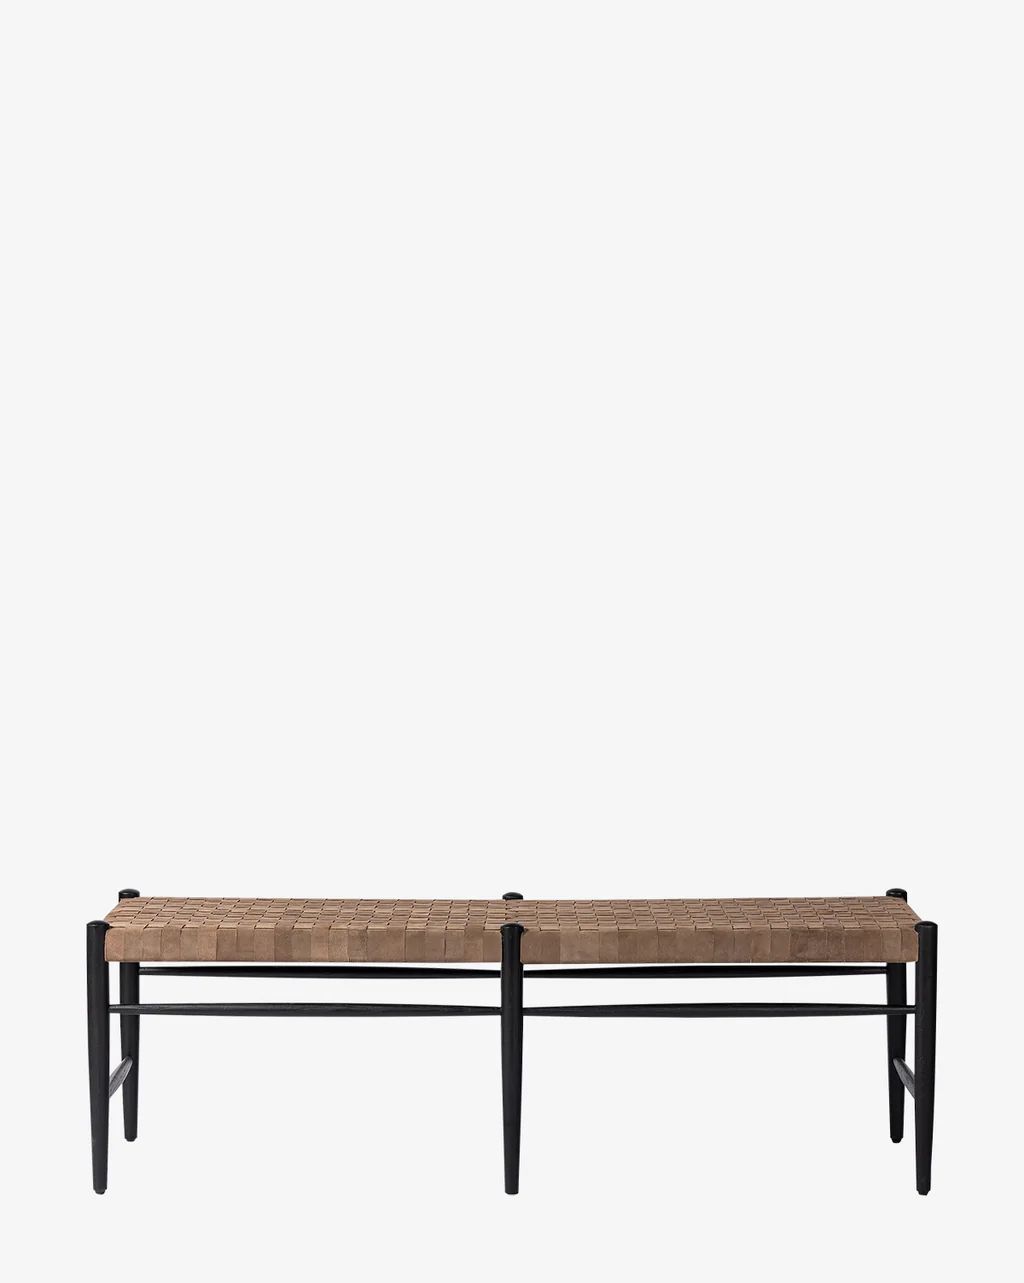 Ollie Woven Leather Bench | McGee & Co.